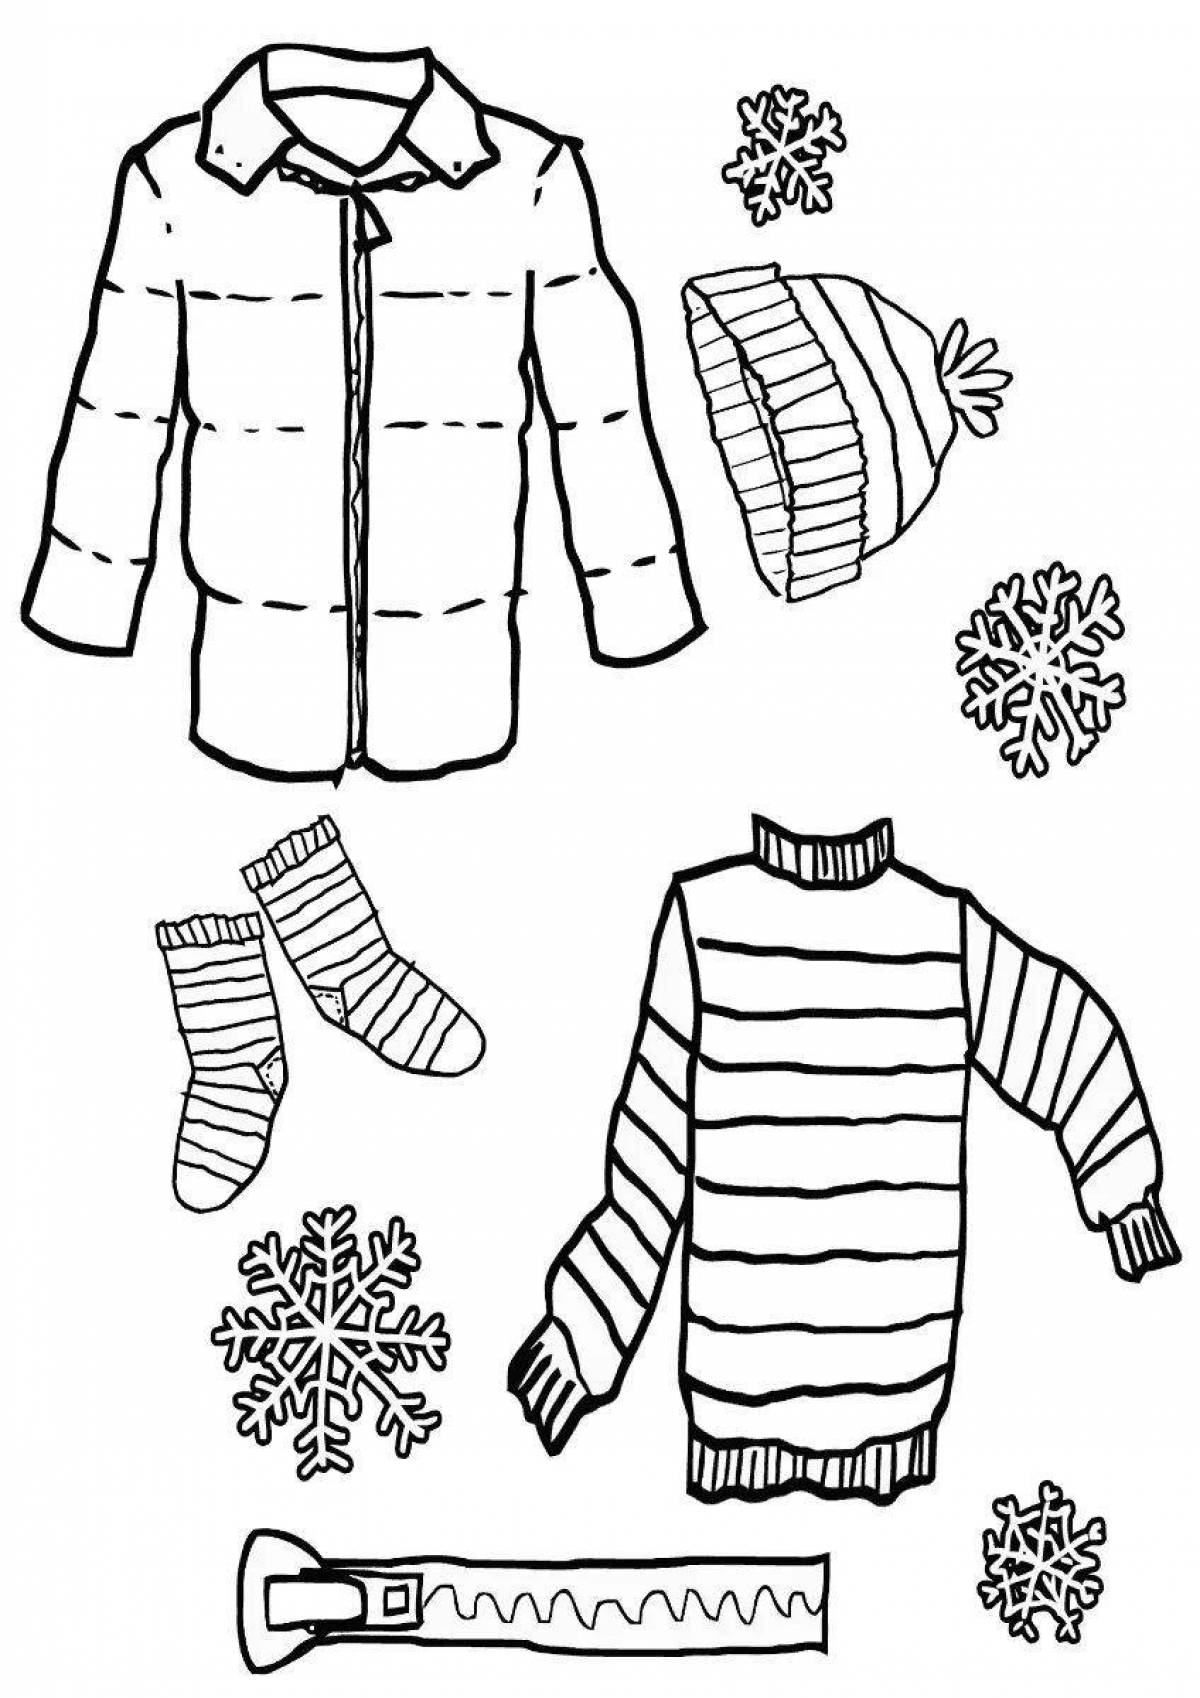 Playful winter clothes coloring page for 4-5 year olds